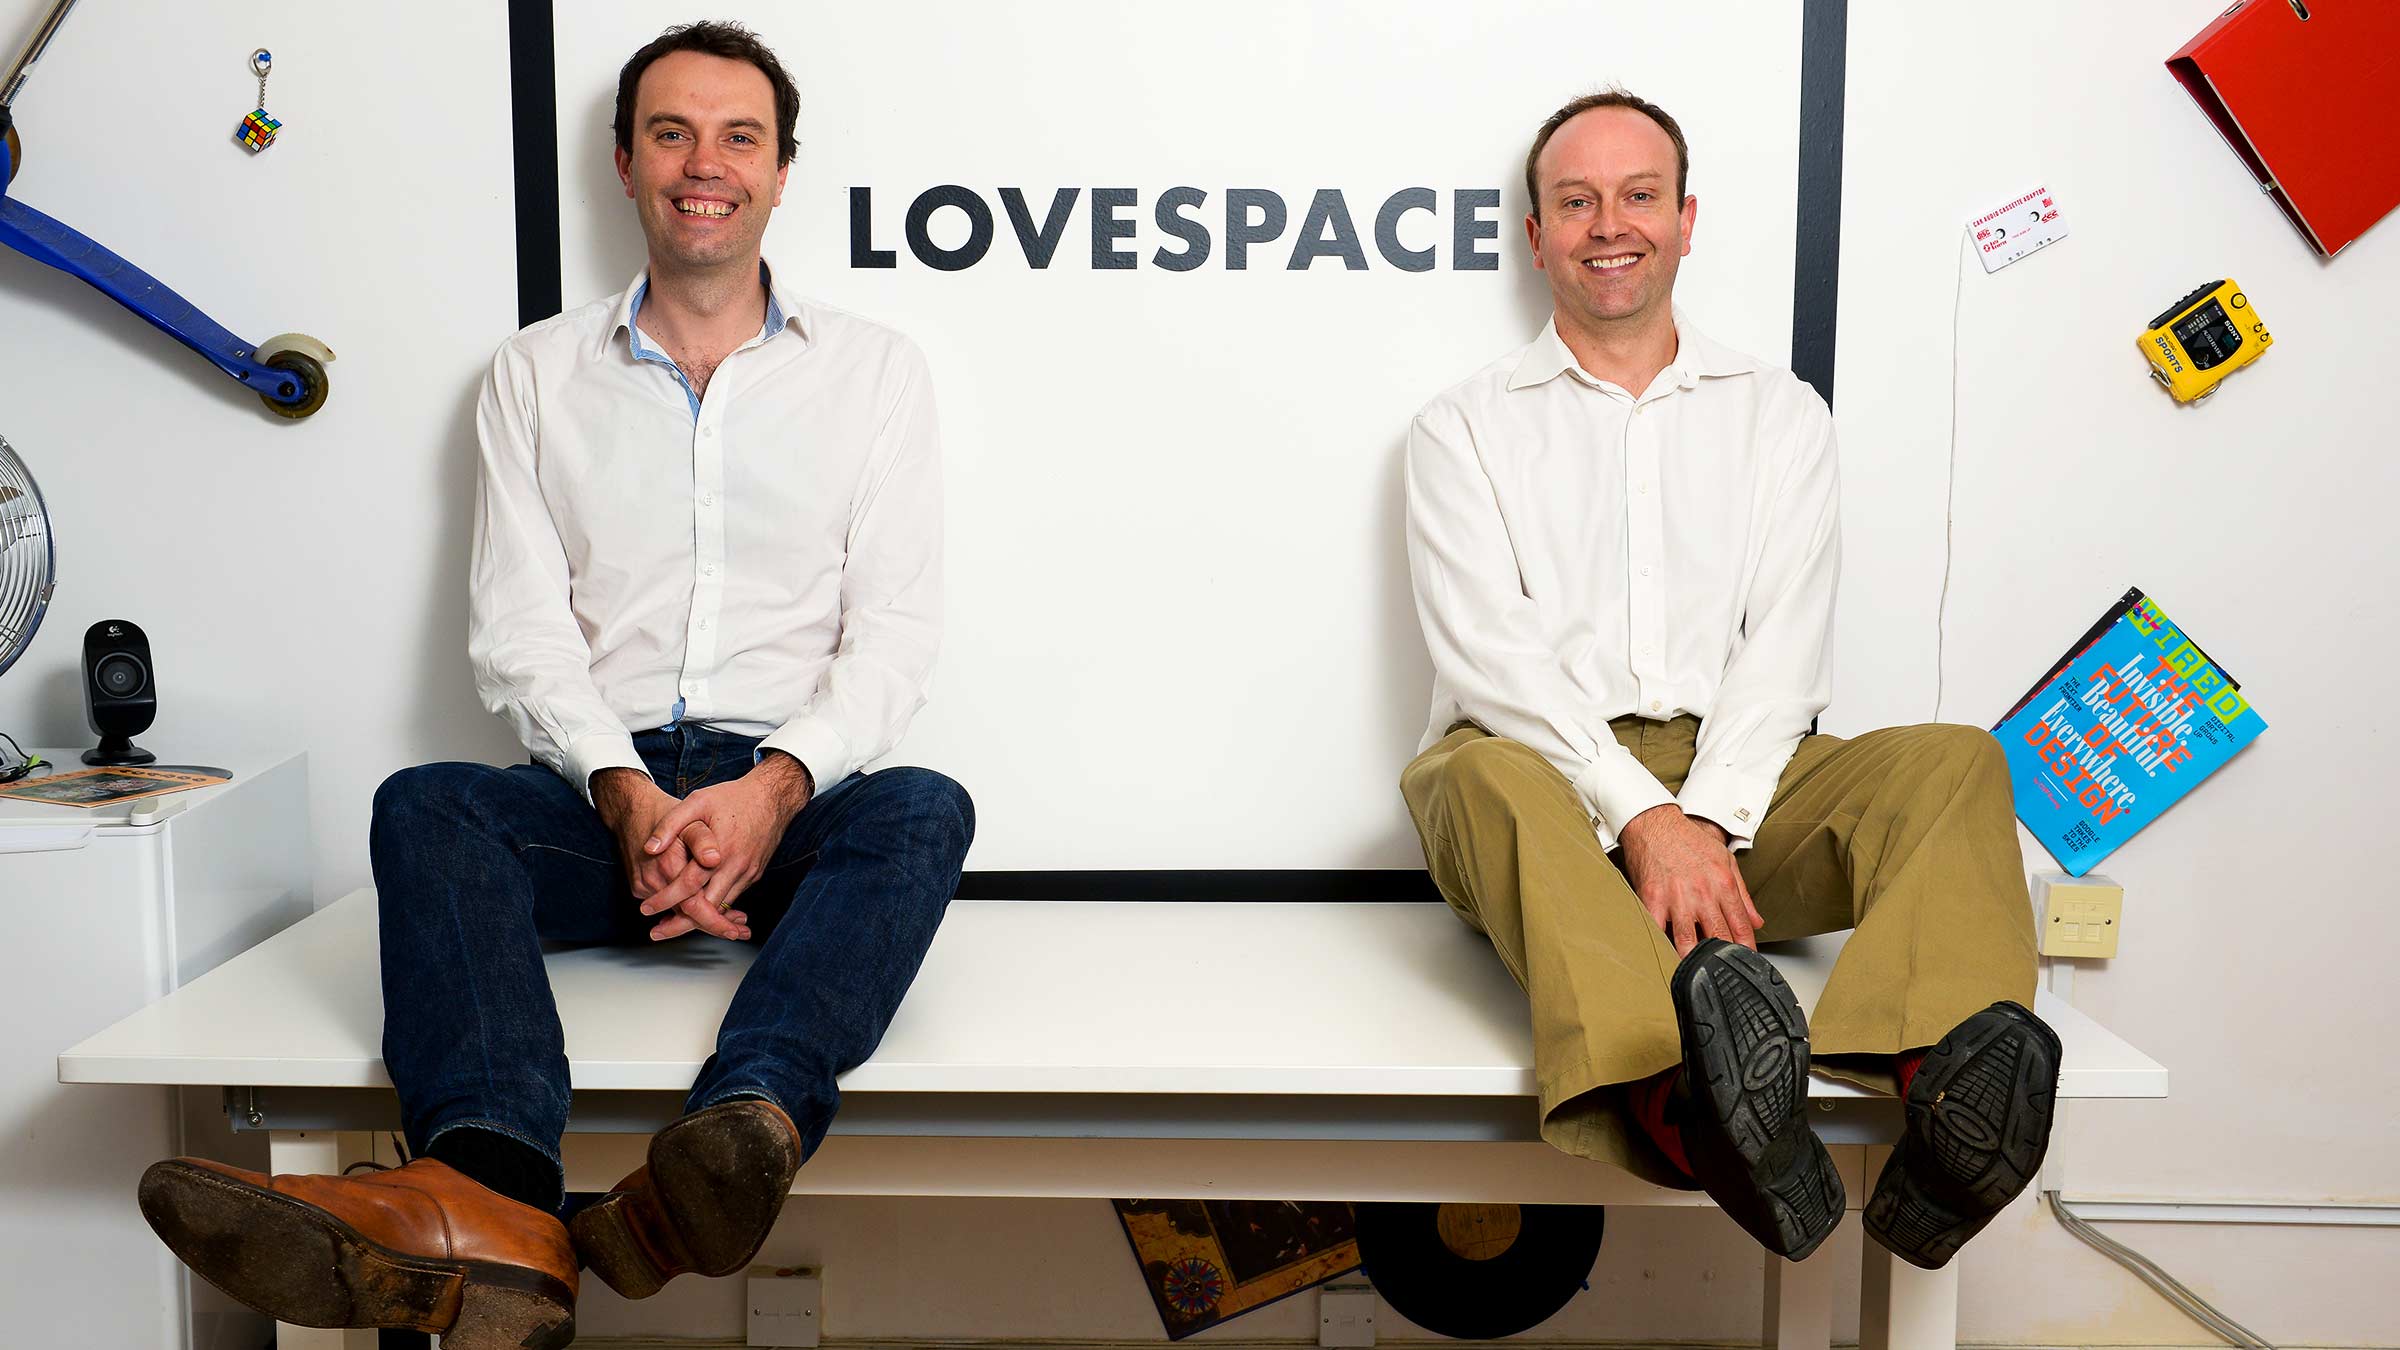 Lovespace: a disruptive new business model